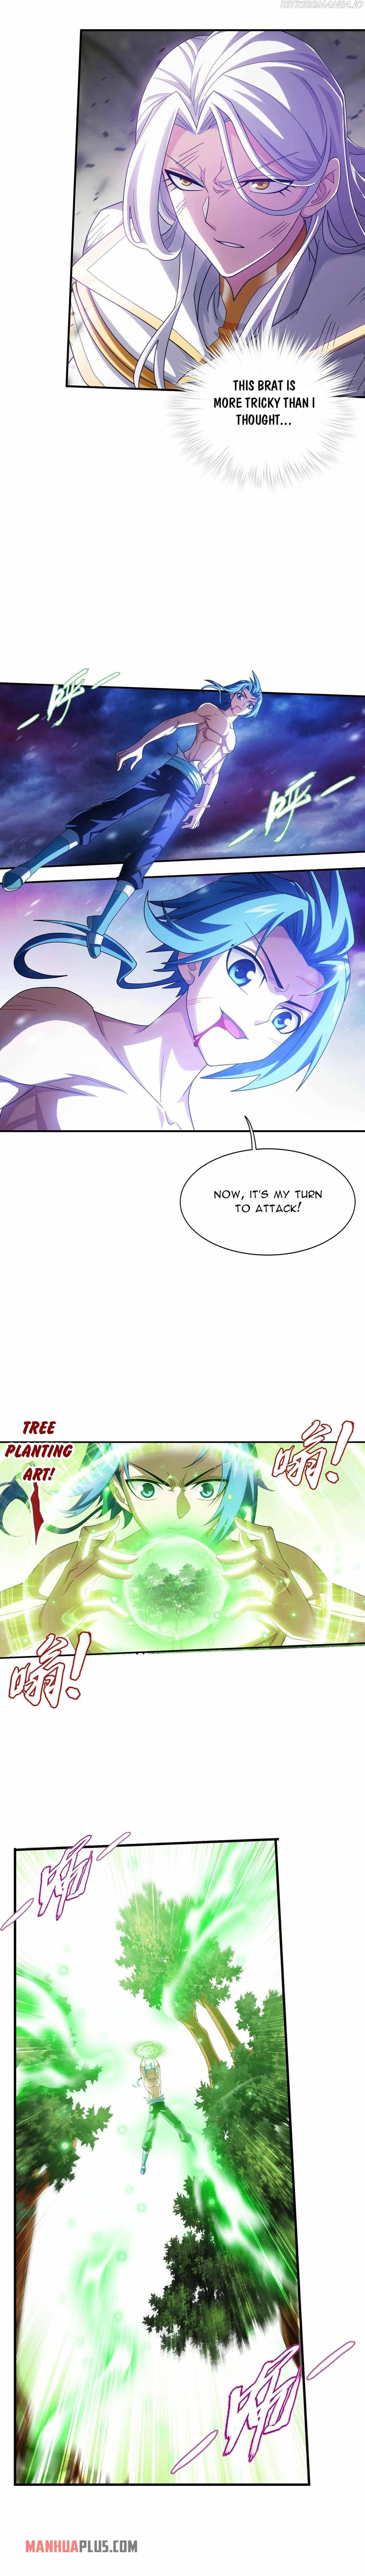 The Great Ruler - Page 3